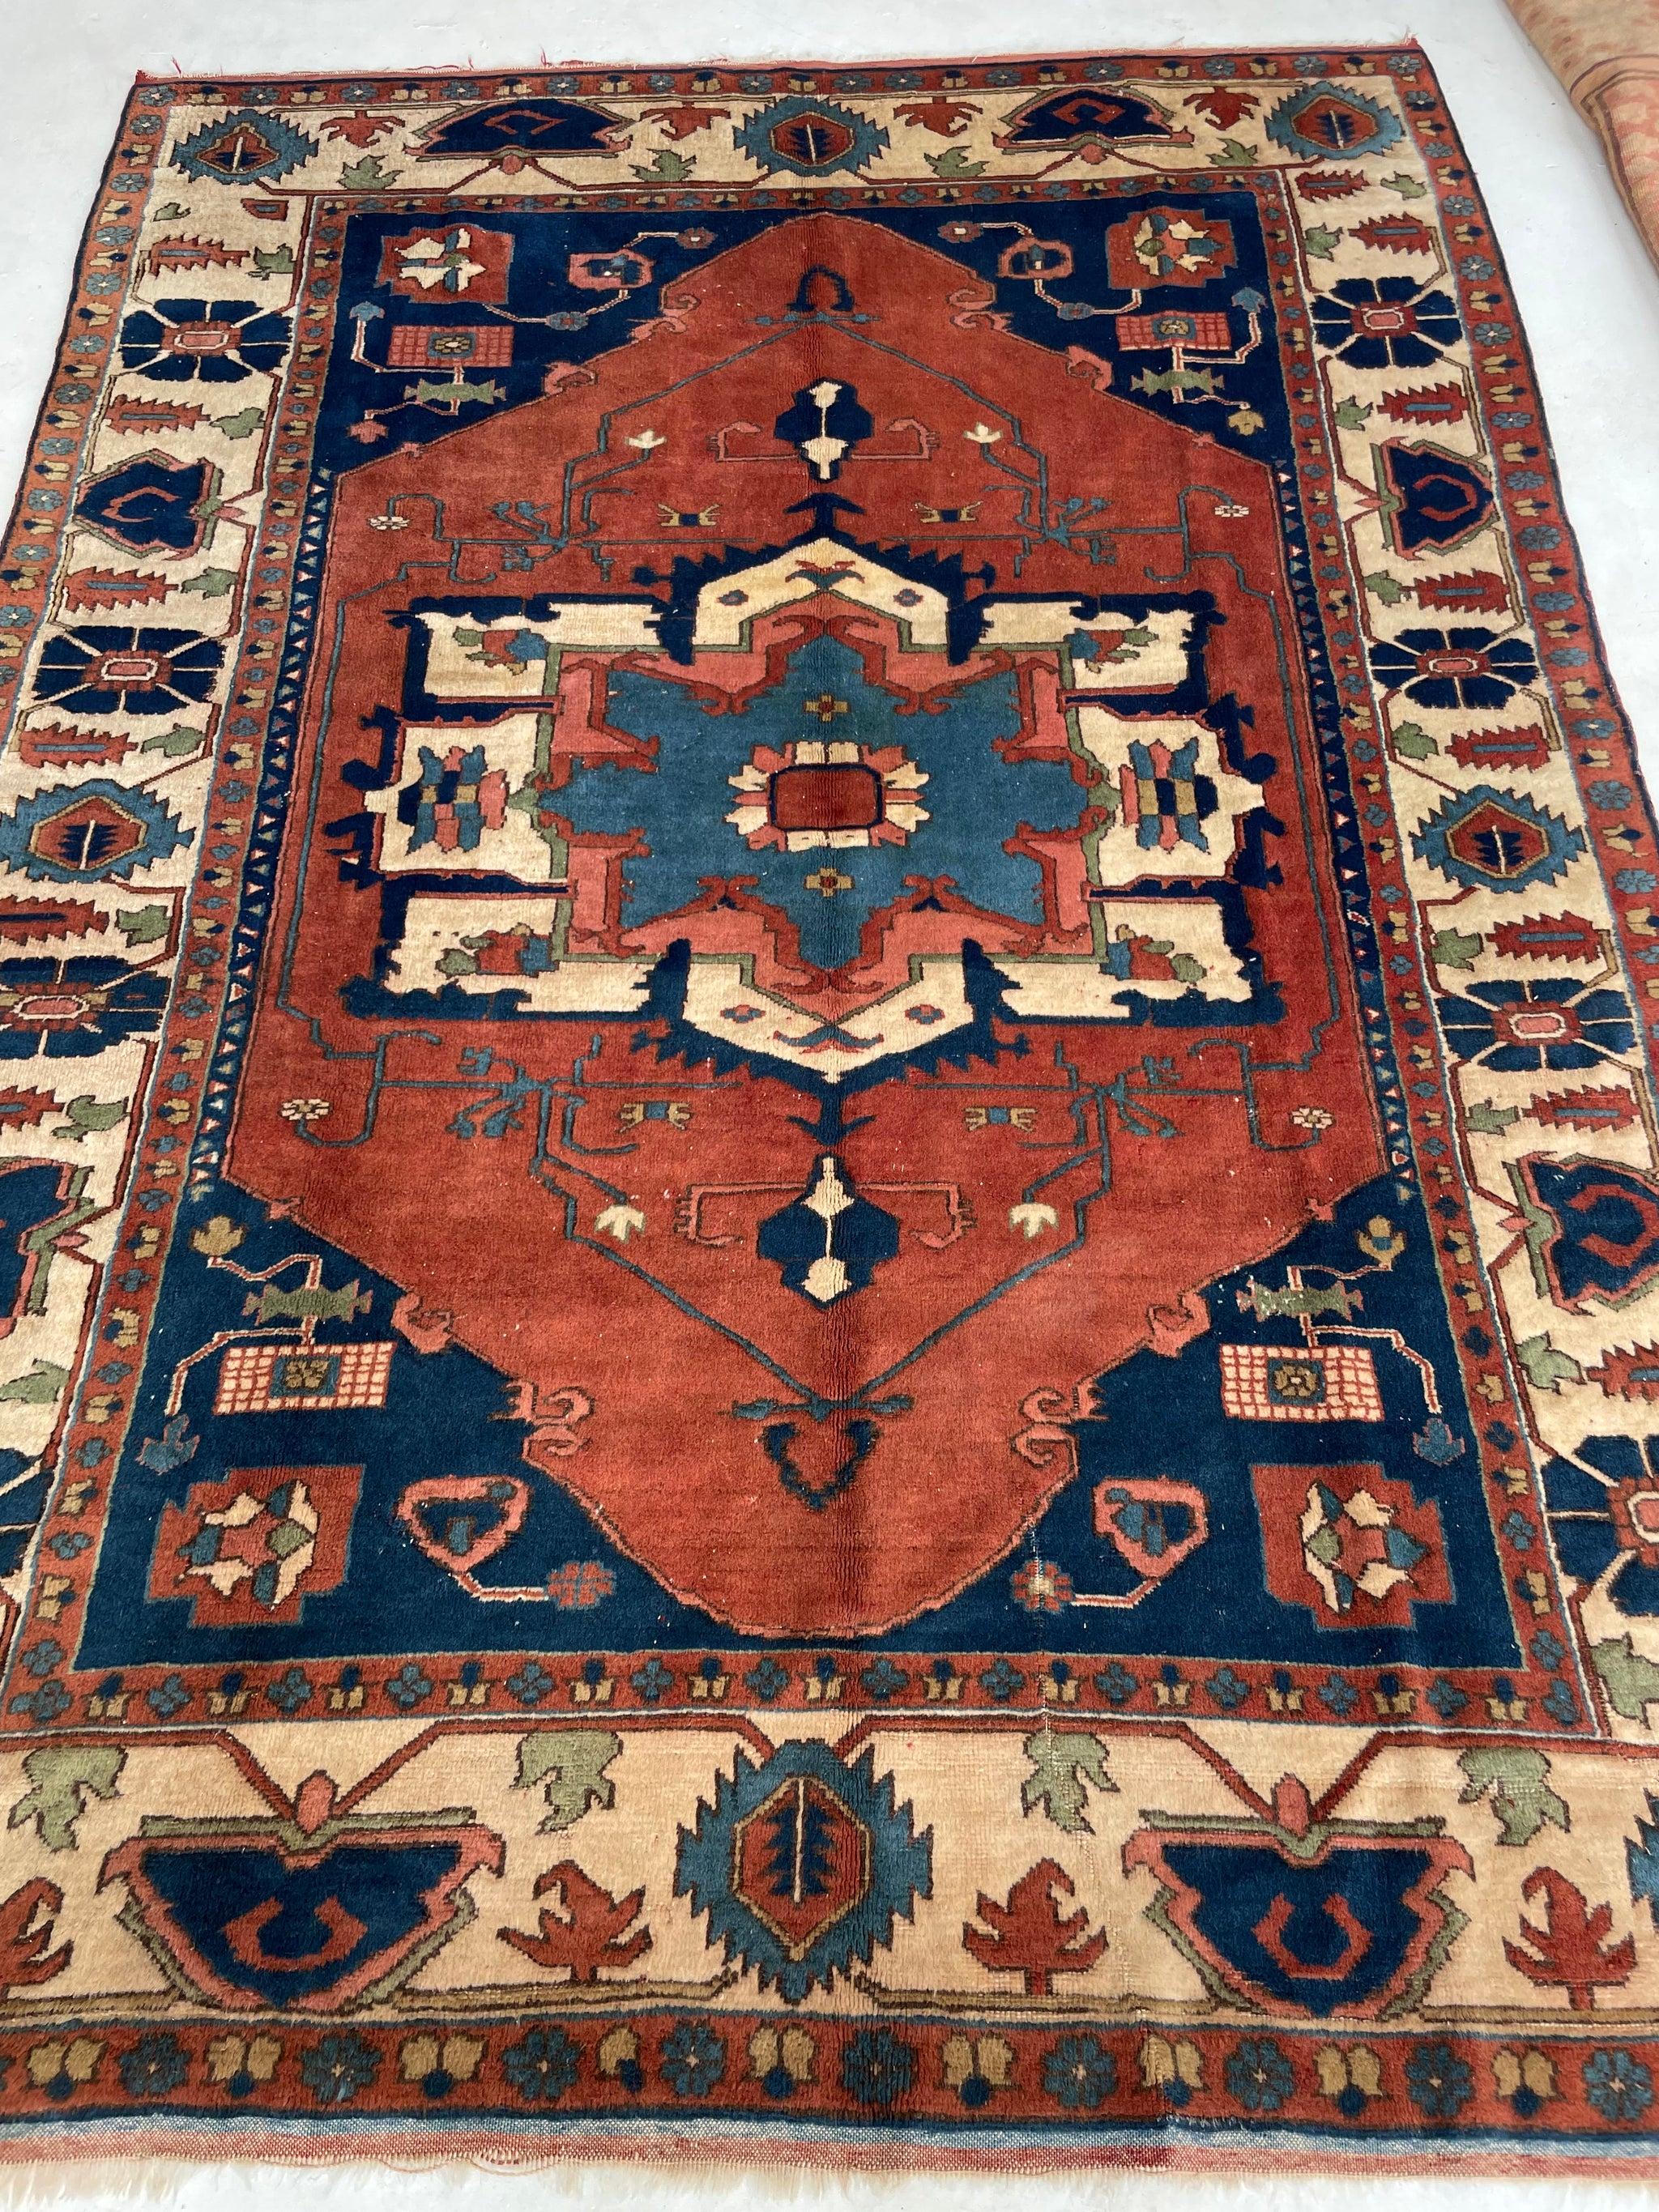 Rich Vintage Turkish SERAPI Design  Rusty Terracotta, Army Green, Sky Blue & More

Size:   7.3 x 10
Age: Vintage, C. 1950's
Pile: Lovely Wool pile, soft and strong 

This rug is one-of-a-kind, only one in the world, no others are available.

Because